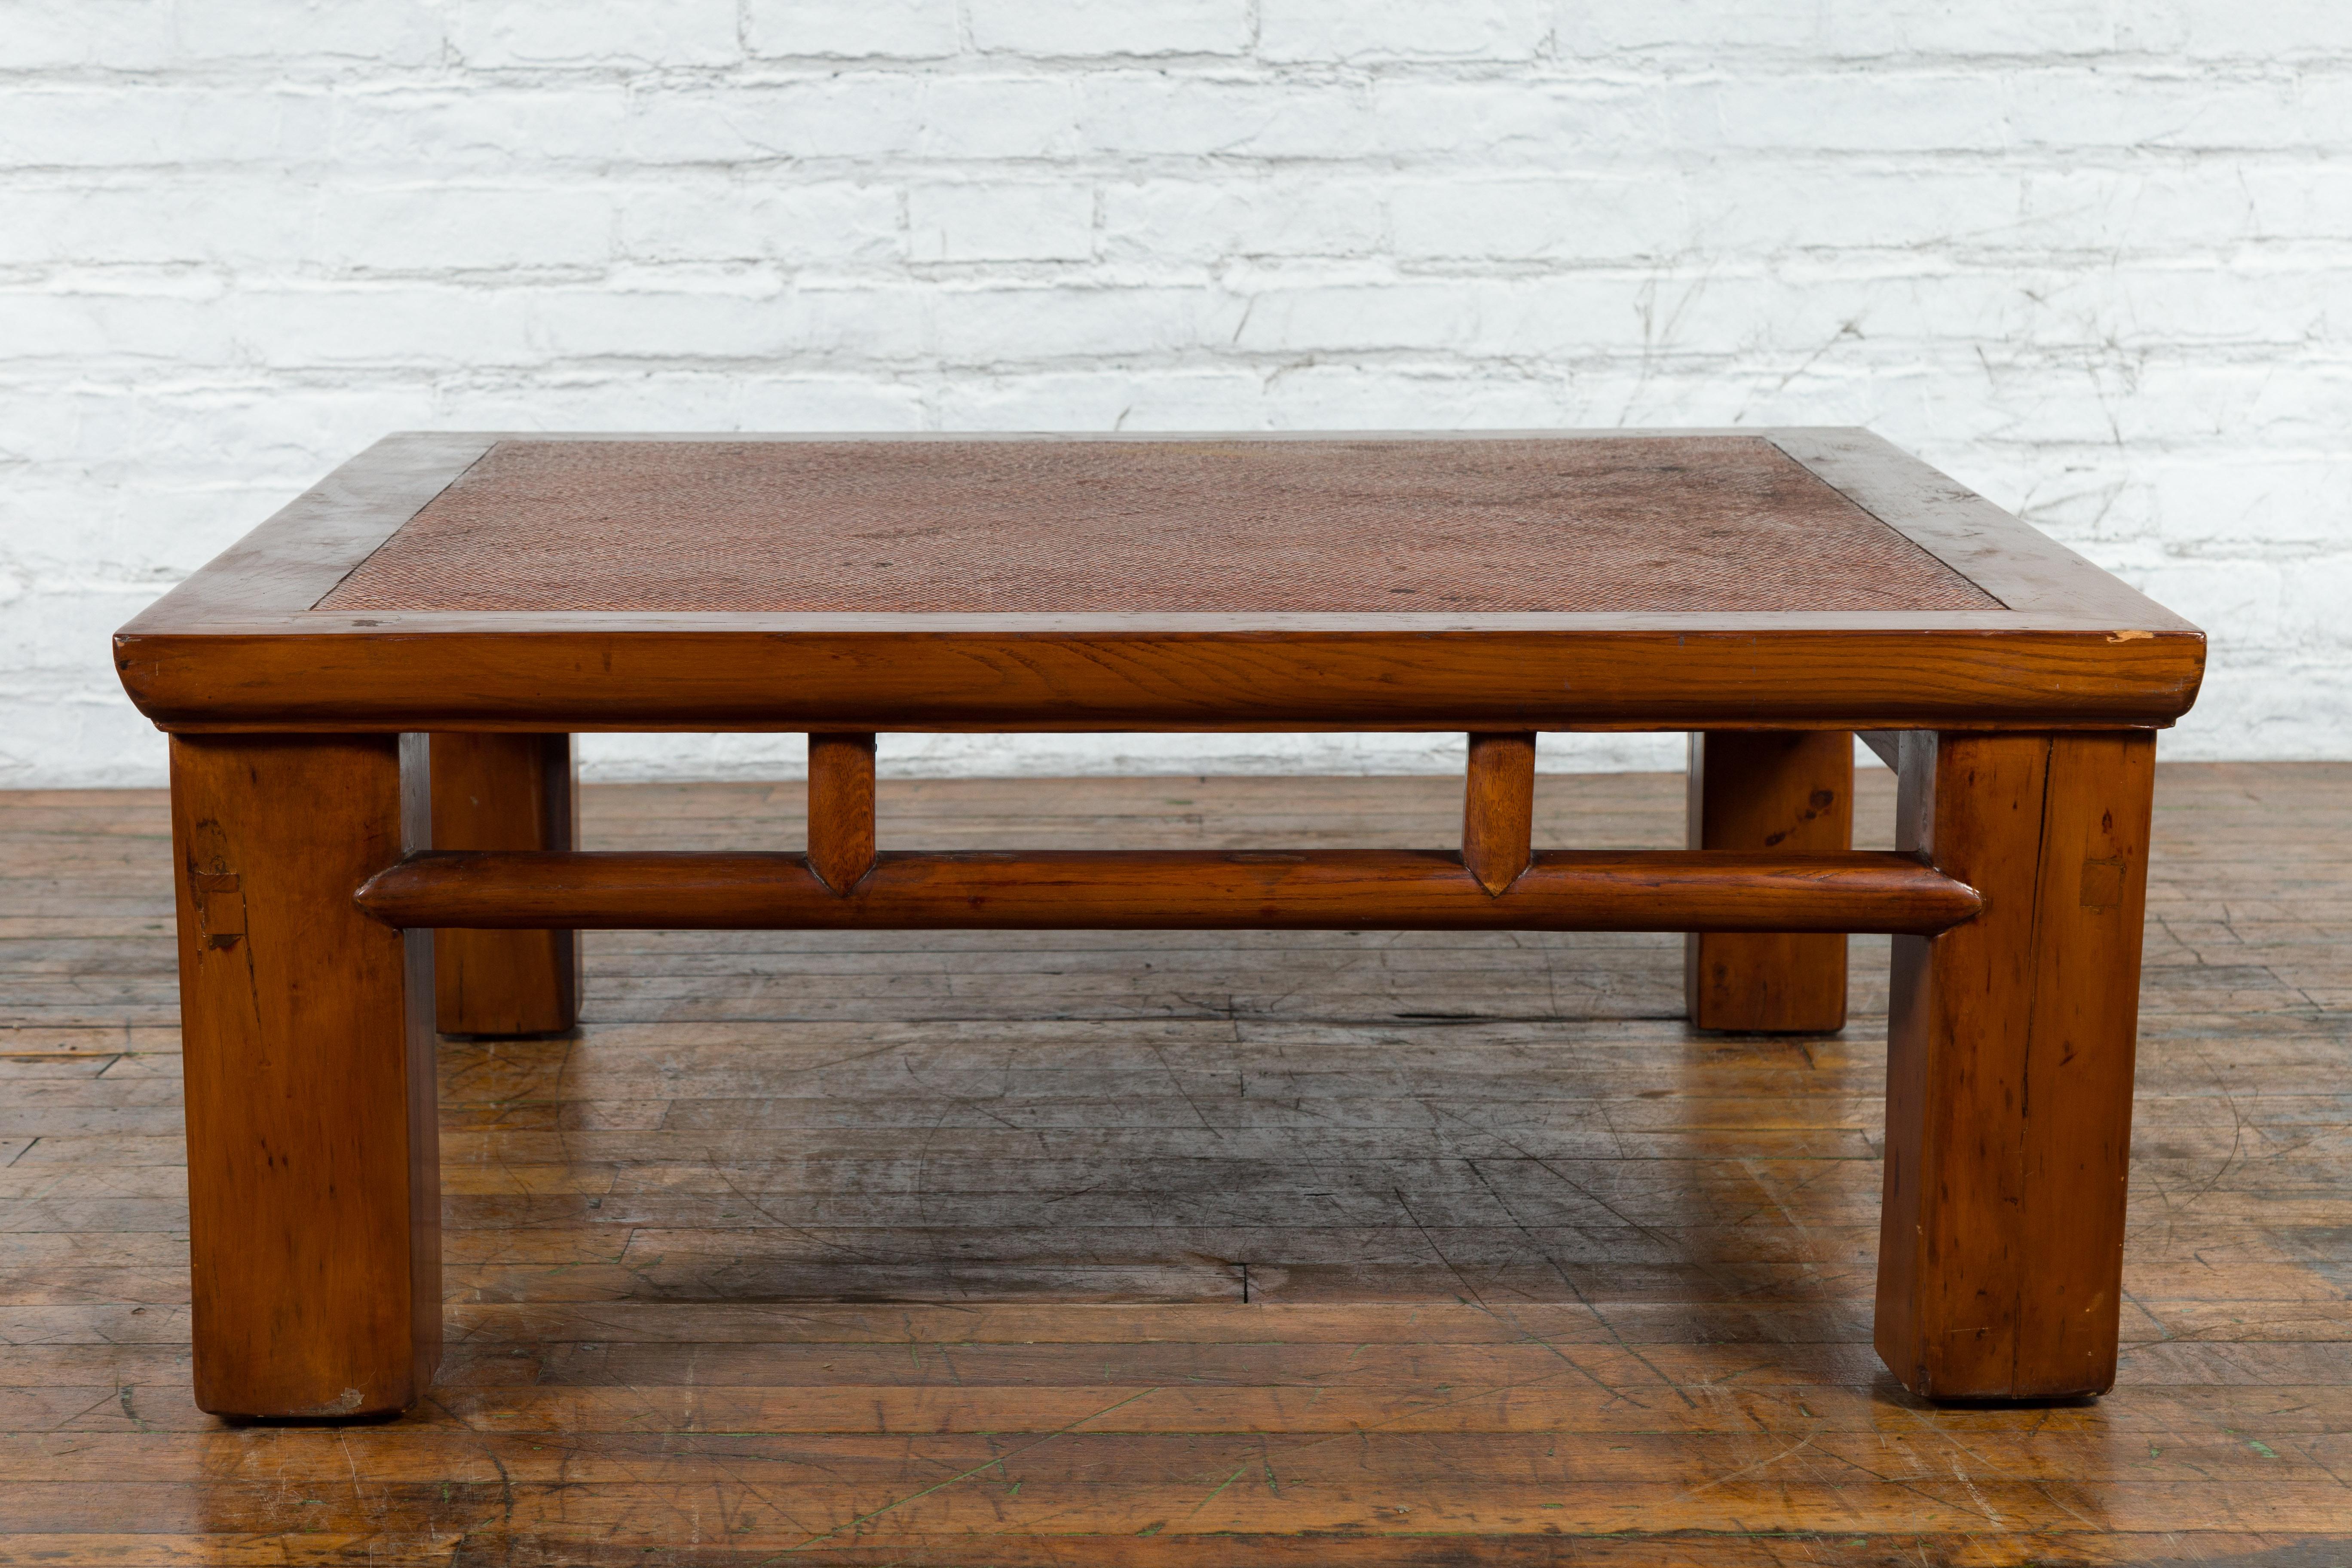 An antique Chinese Qing Dynasty period elm wood coffee table from the 19th century, with hand-woven rattan top inset, square legs, open apron and pillar strut motifs. Created in China, this low table was originally made from a cut down Lohan bed,